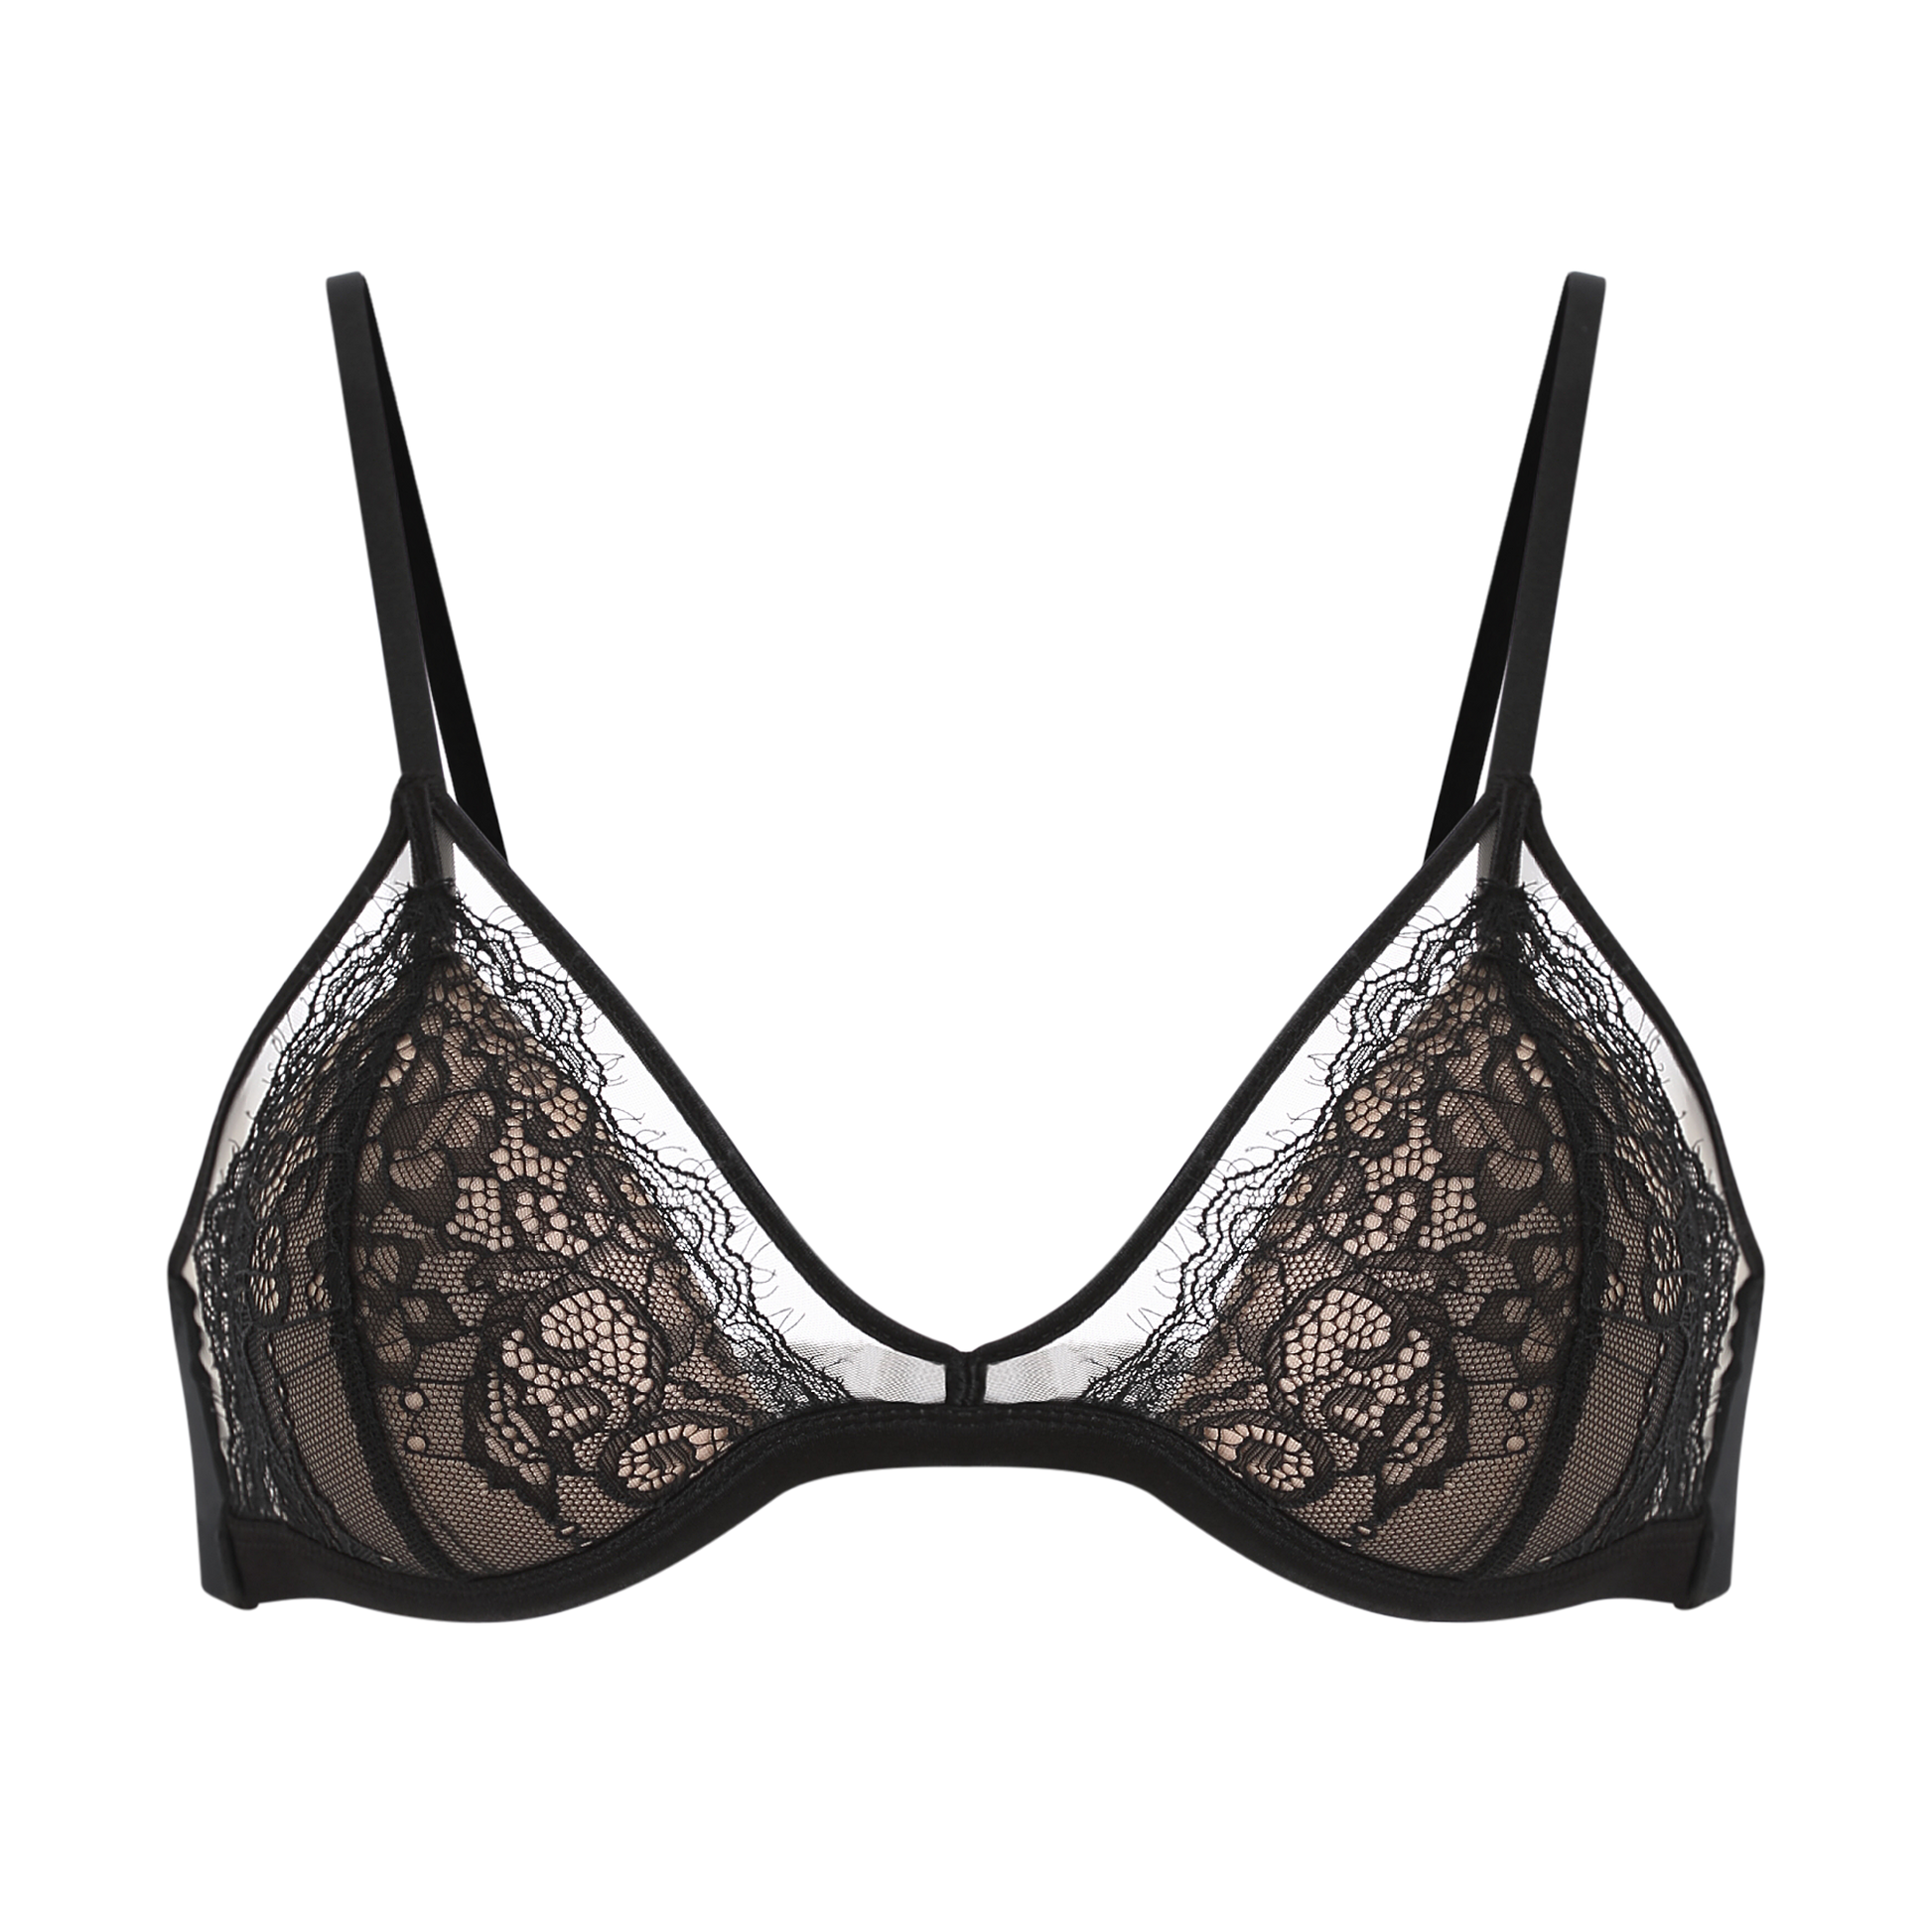 Elegant black lace bralette with a sheer floral design, featuring adjustable straps and a soft, comfortable fit, made from 100% polyester cup lining and 86% nylon, 14% spandex side wing lining.